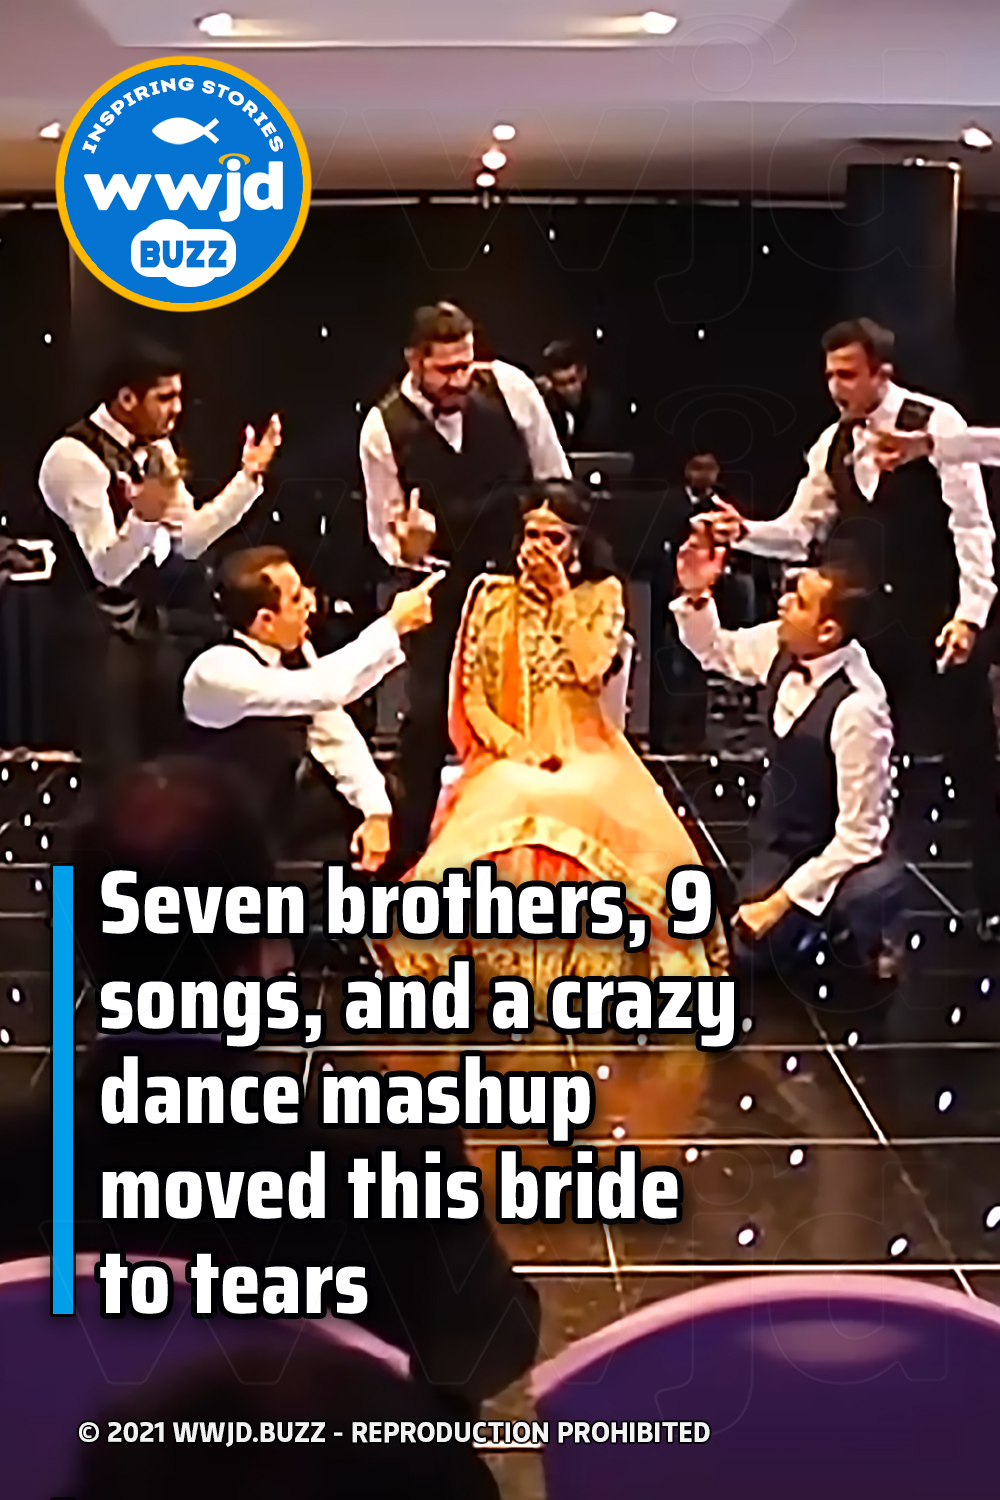 Seven brothers, 9 songs, and a crazy dance mashup moved this bride to tears